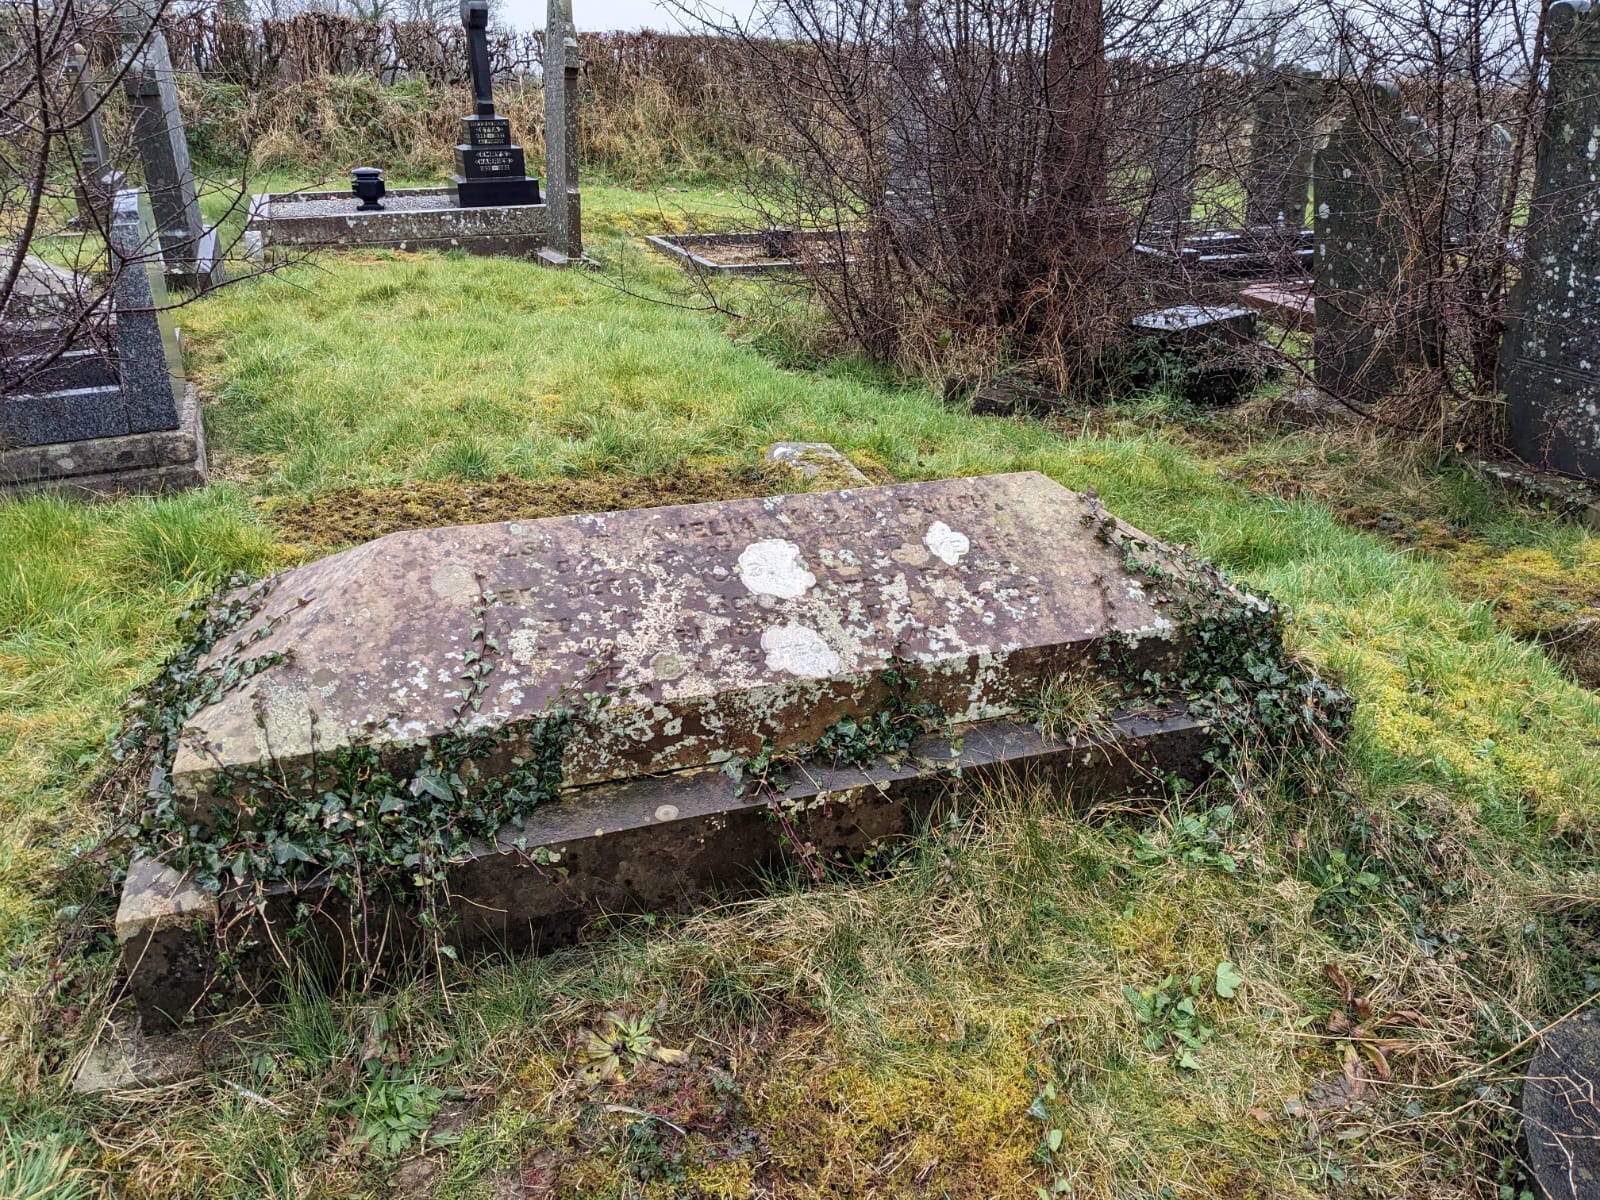 A concrete grave covering, covered in lichen and ivy, amidst green grass and bare trees in a church cemetery.